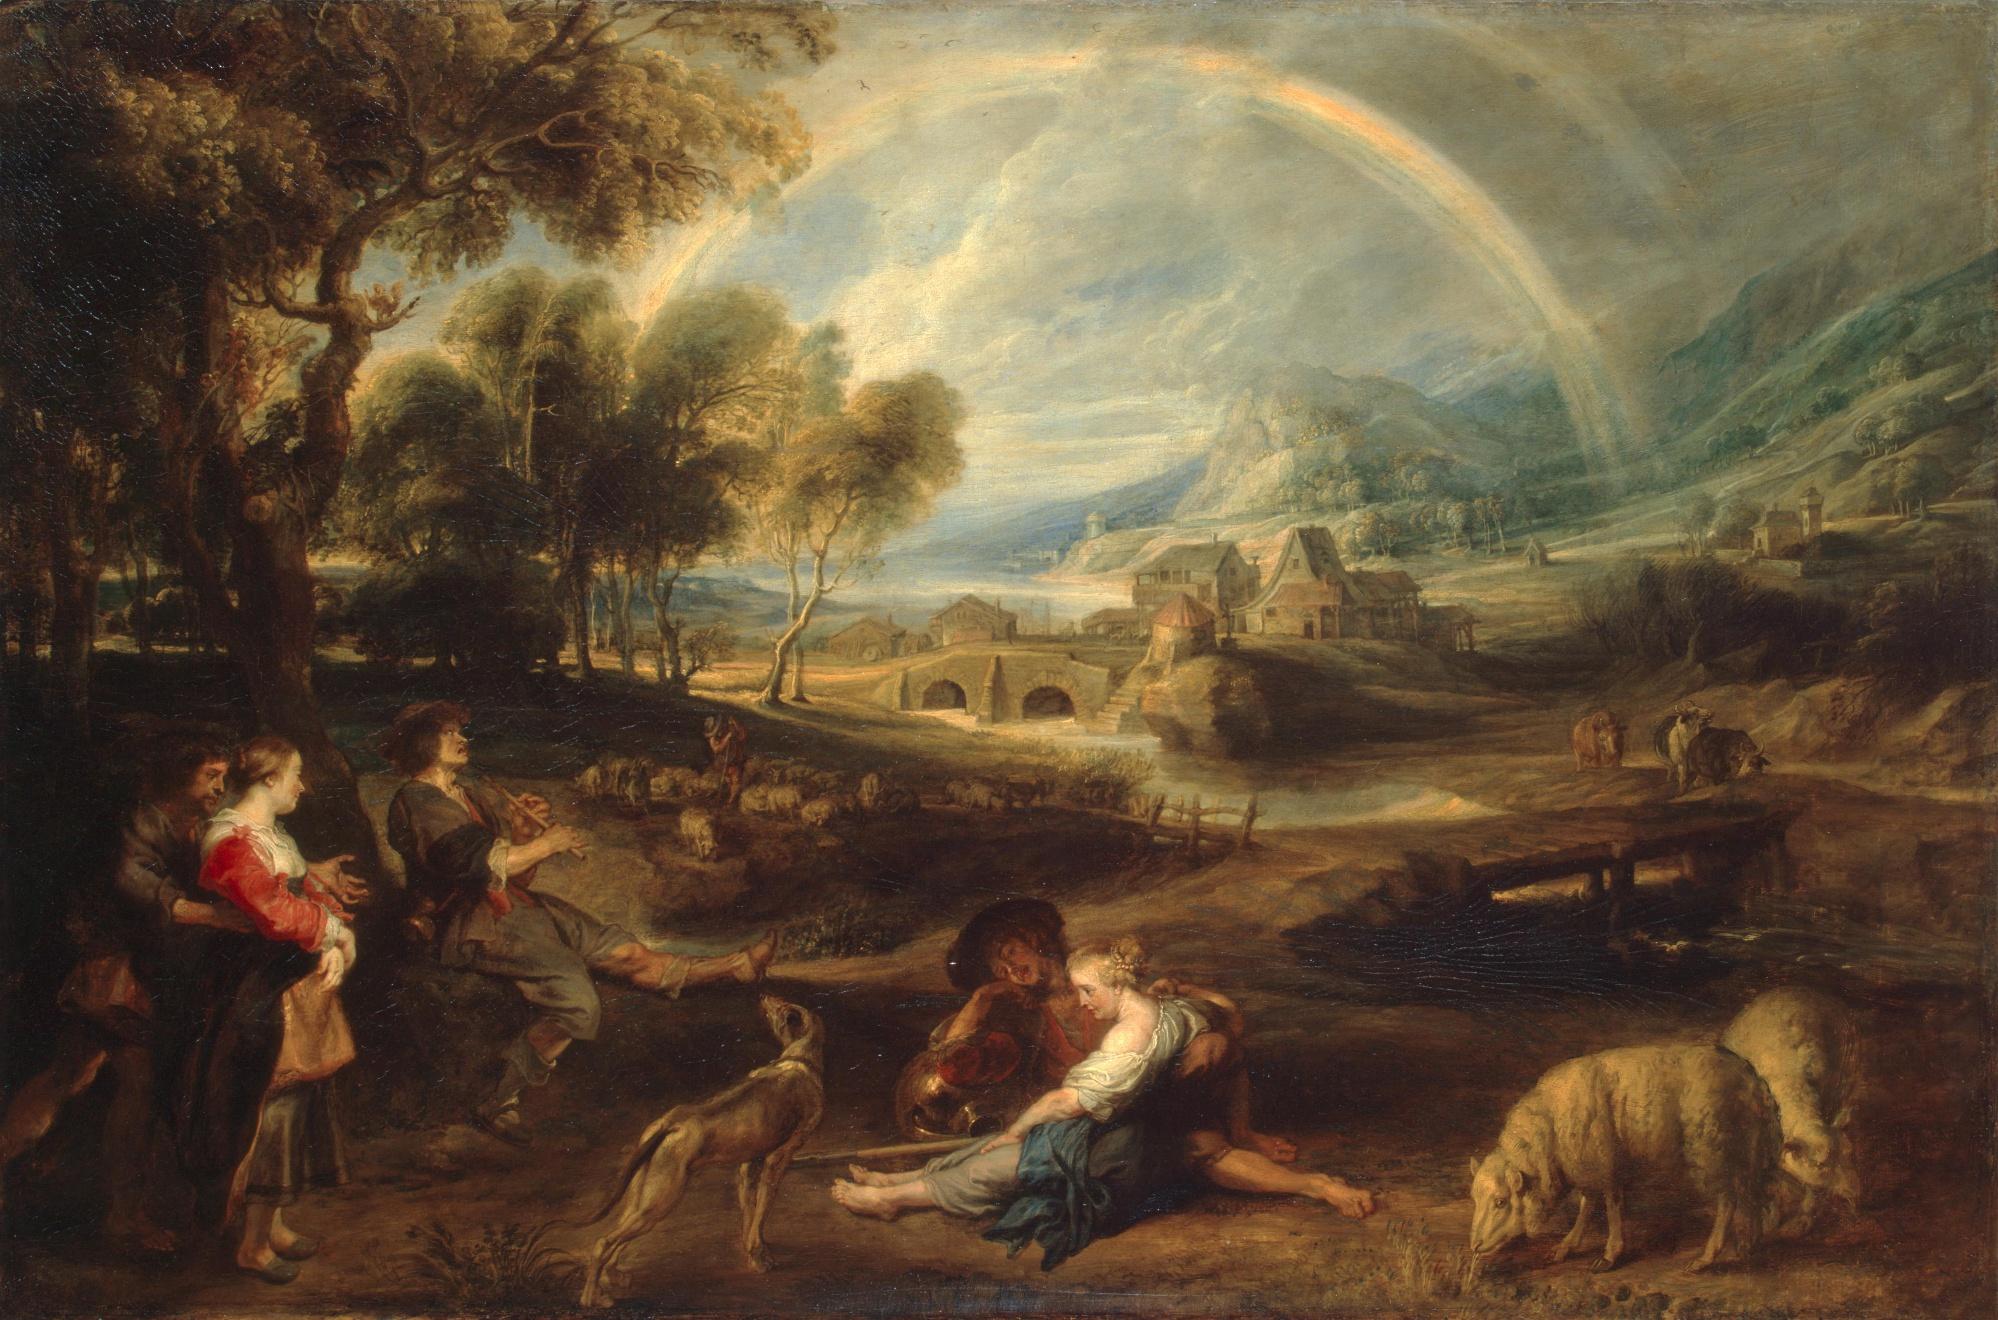 This painting has been the subject of a study by the art historian Fabrizio Dassie (available on request), confirming its inclusion in Jan van Bunnik’s corpus. 

In this painting, Jan van Bunnik presents us with an Italian-inspired landscape.